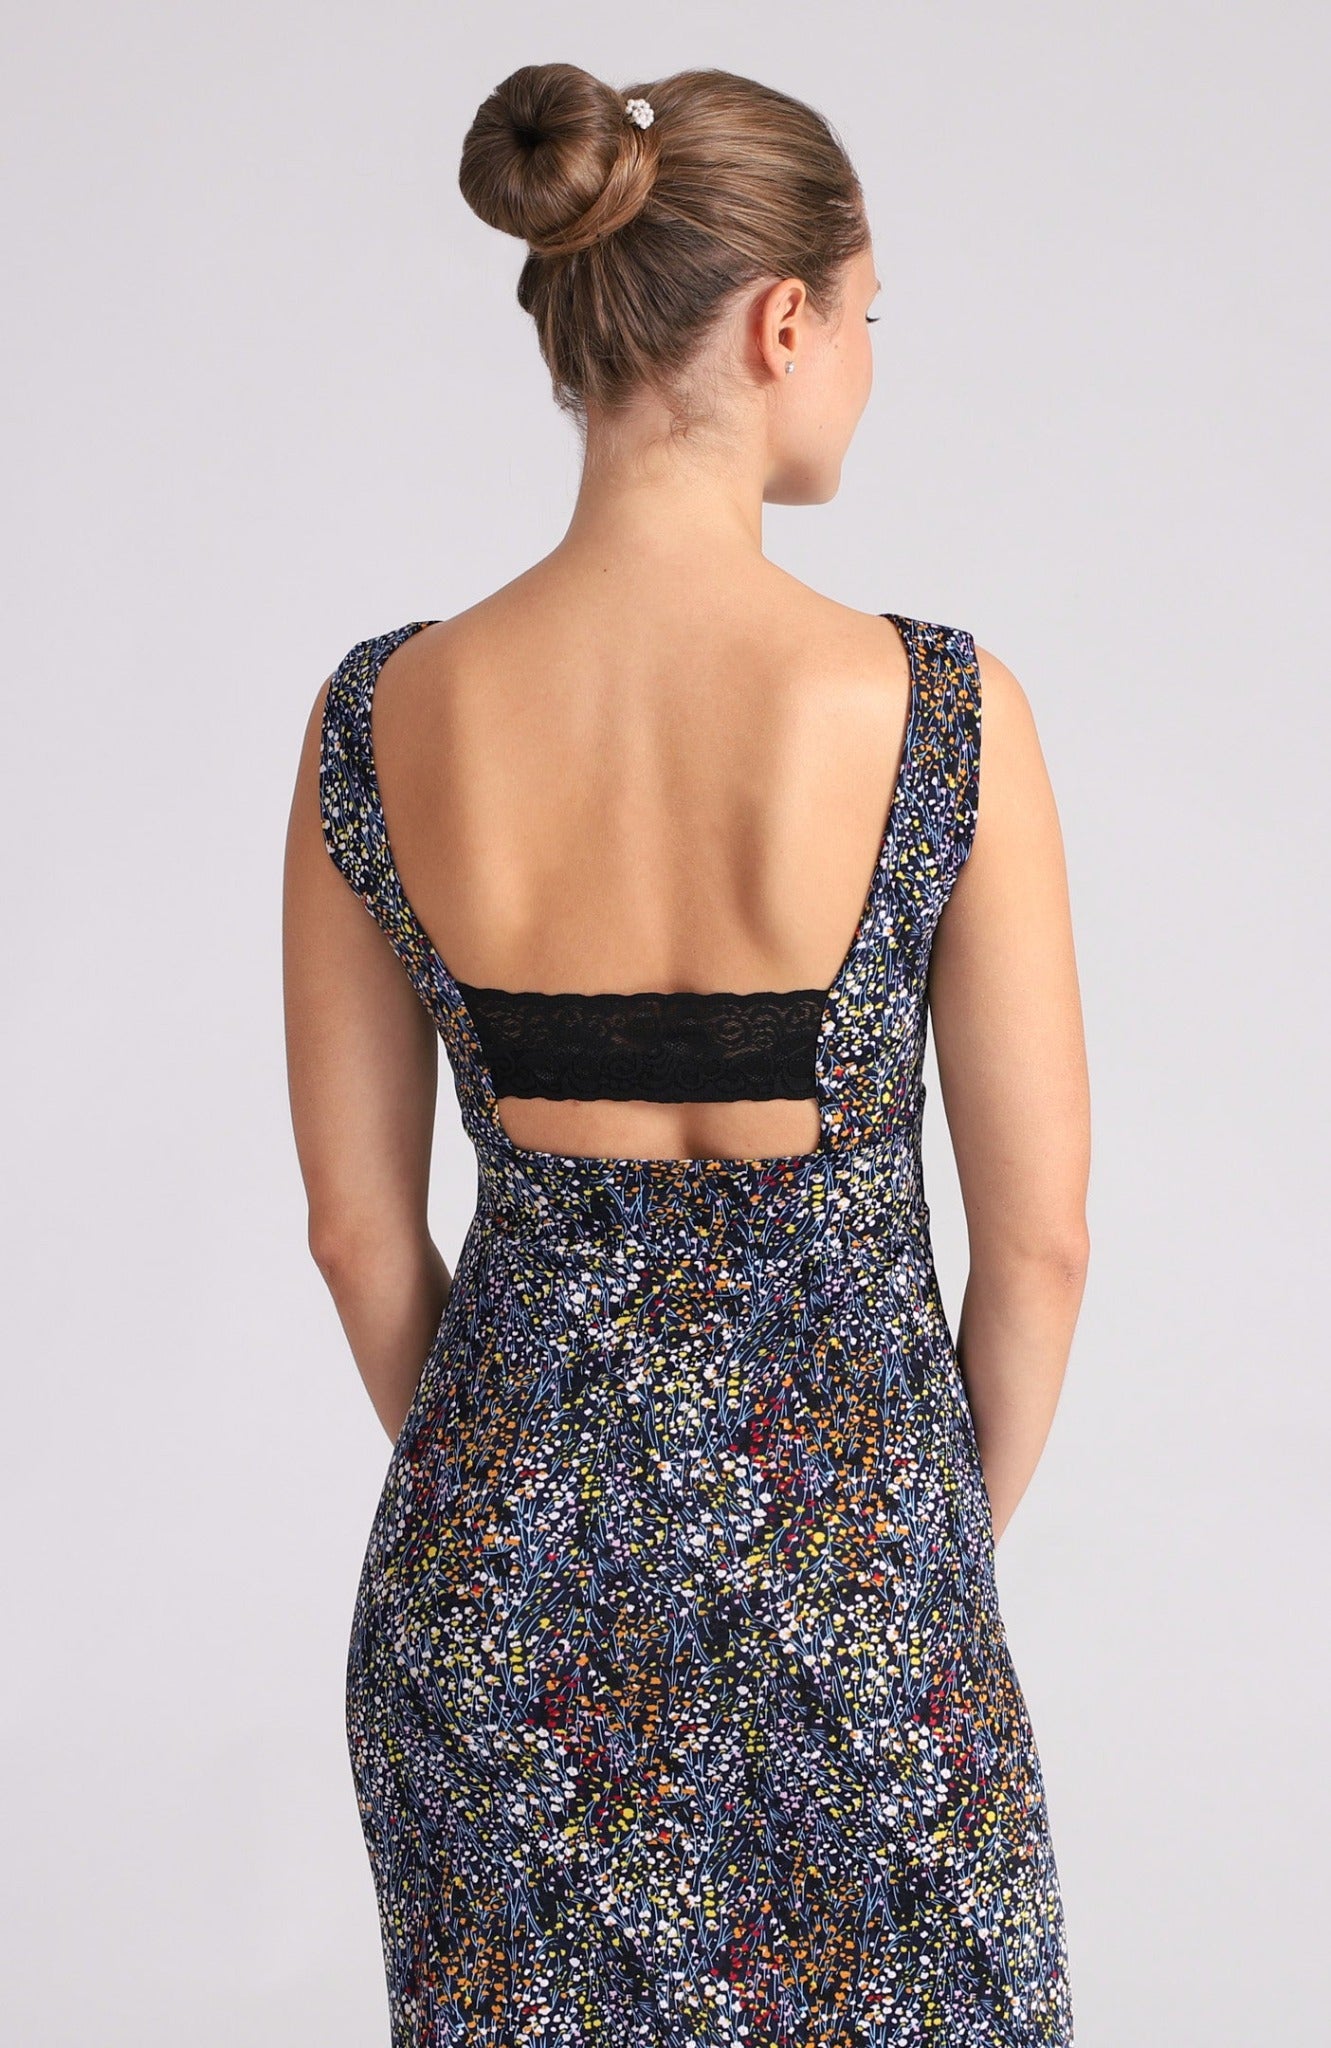 OLIVIA - Tango Dress in Dotted Flowers with Elegant Lace Detail